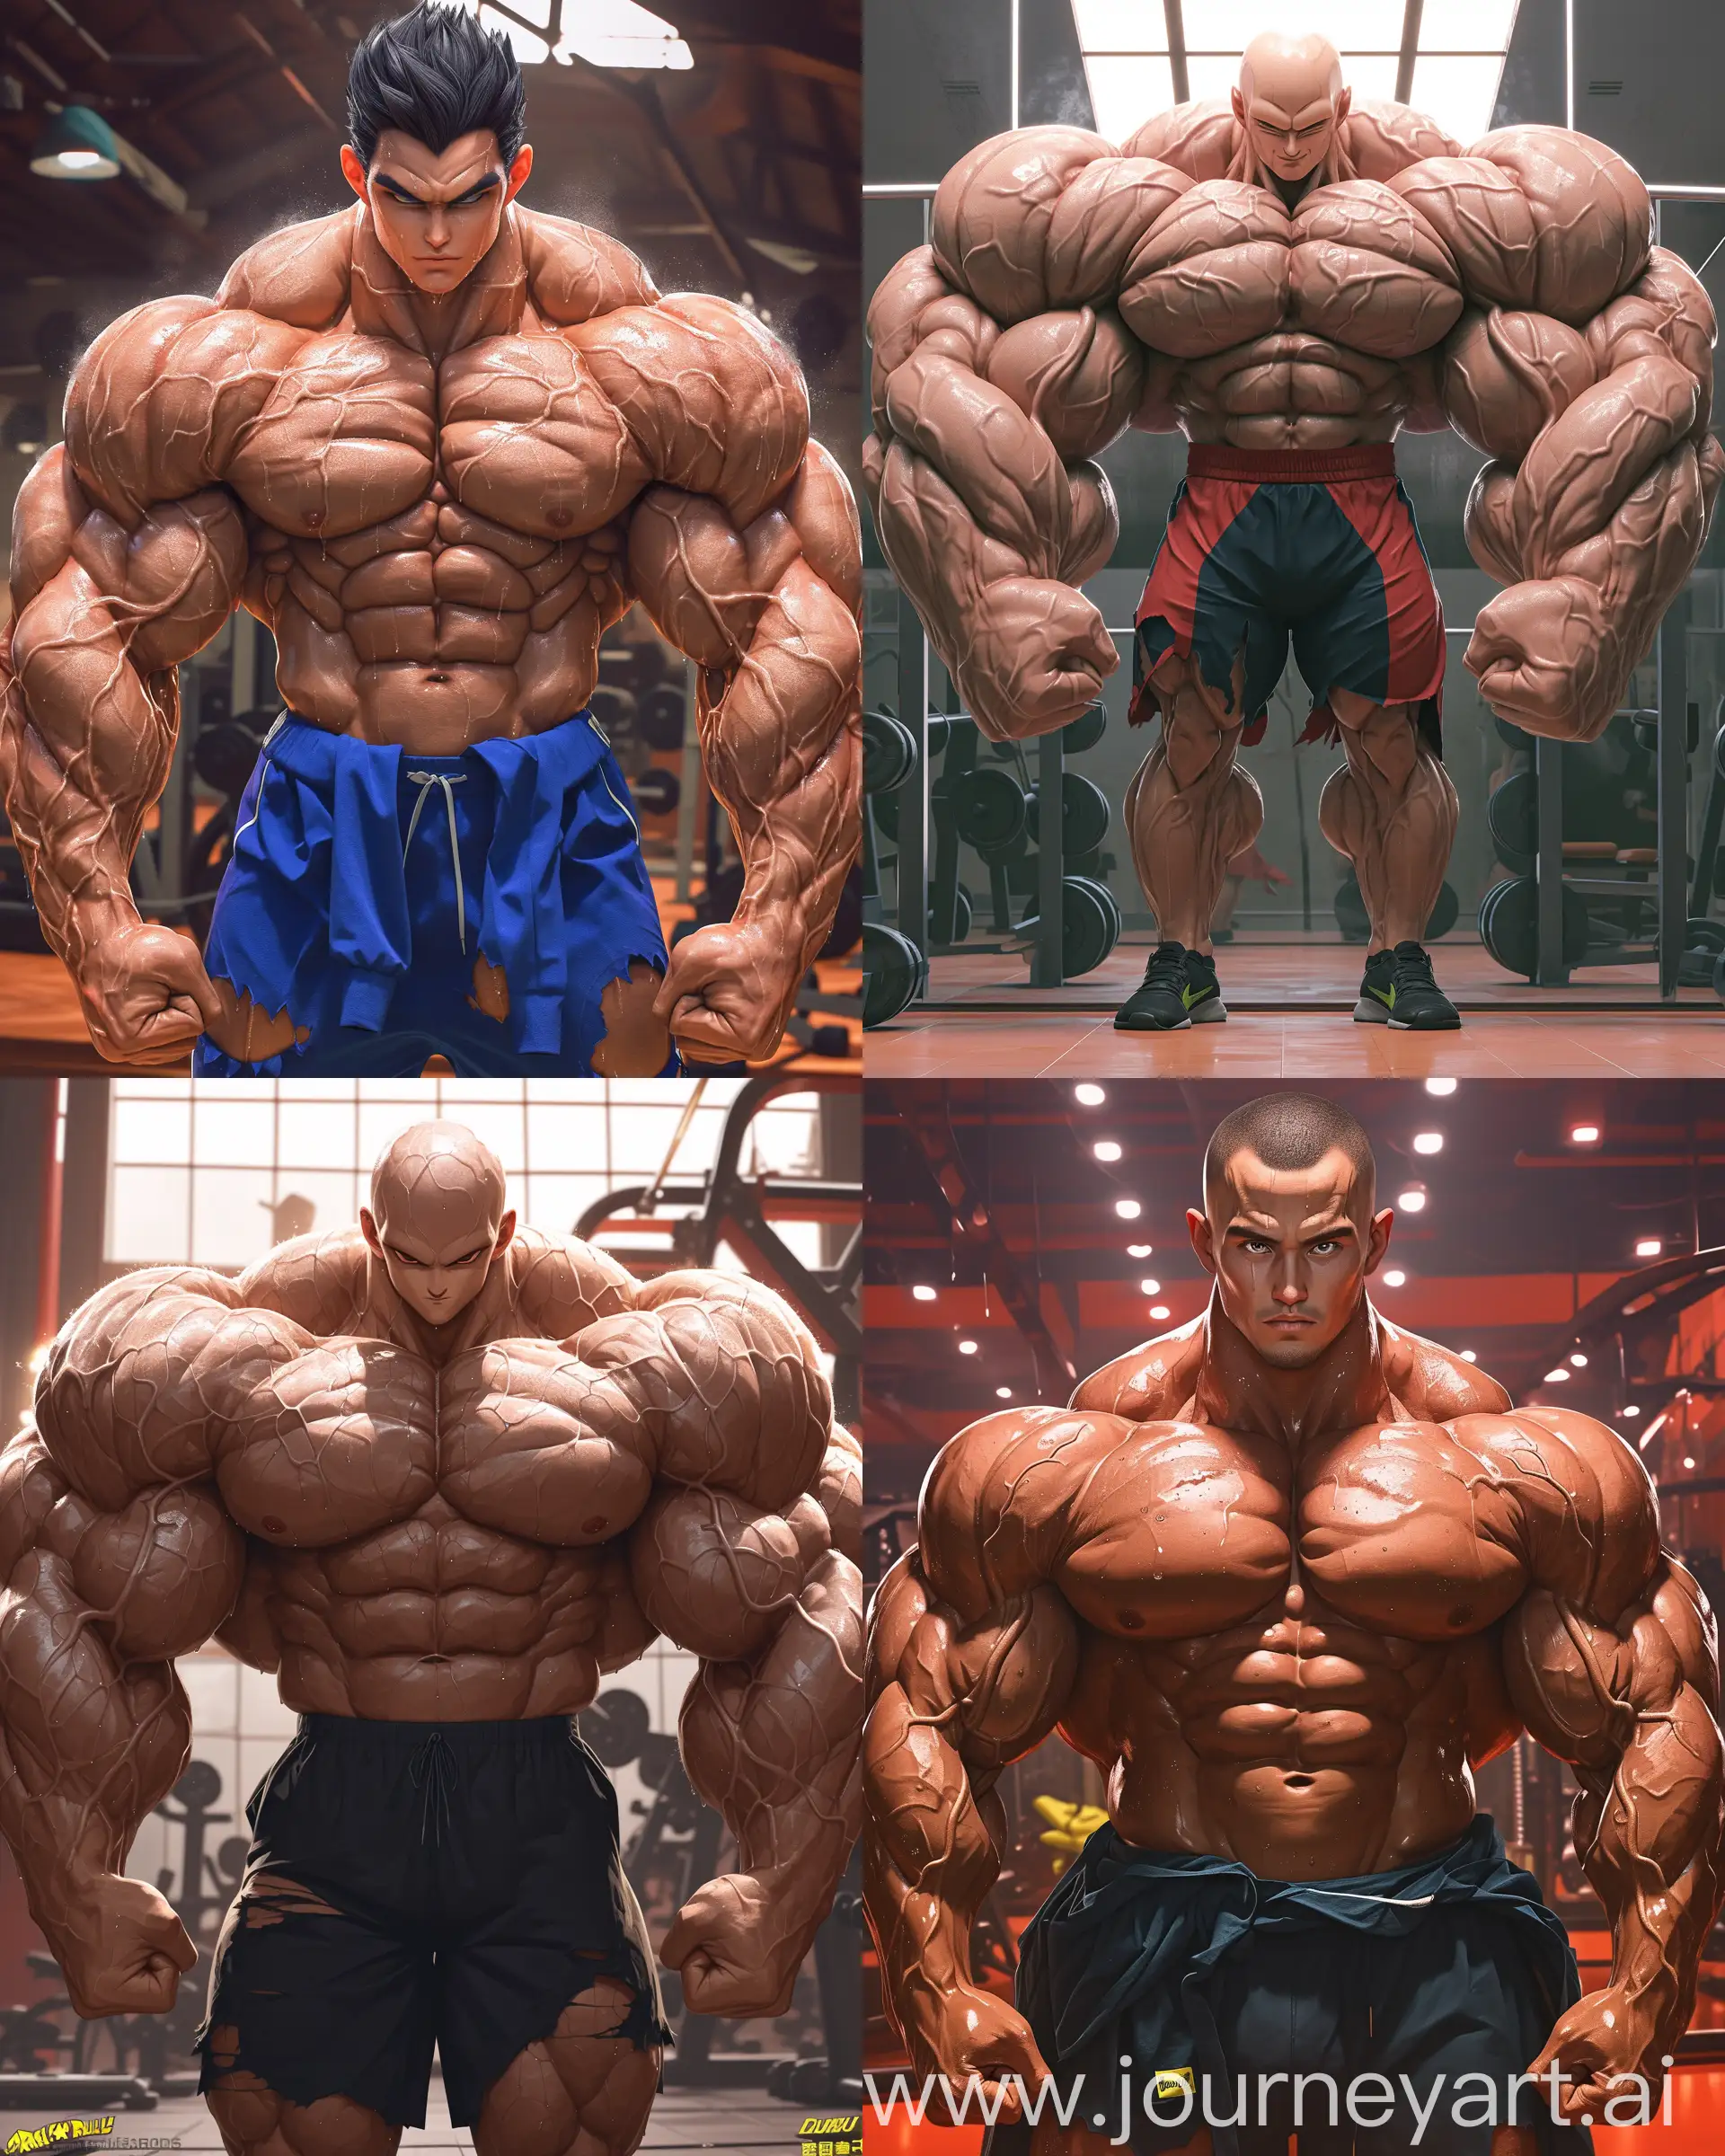 Muscular-Trunks-from-Dragon-Ball-World-Dominates-the-Gym-Scene